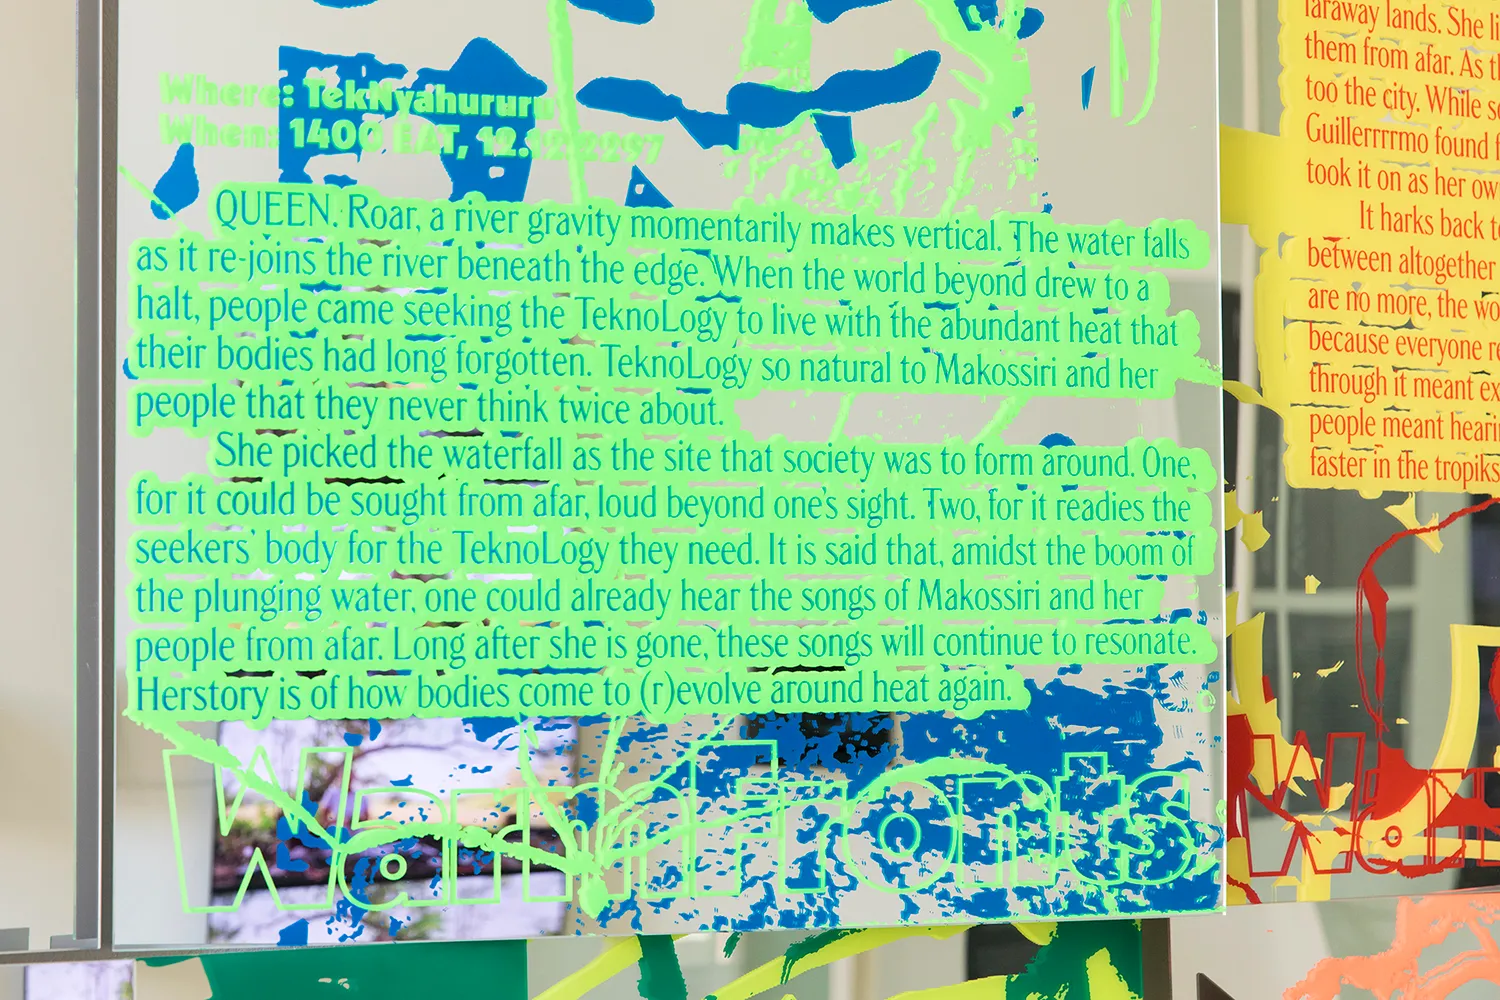 Close up of a mirror with printed text in green and blue "Queen. Roar, a river gravity momentarily vertical..."